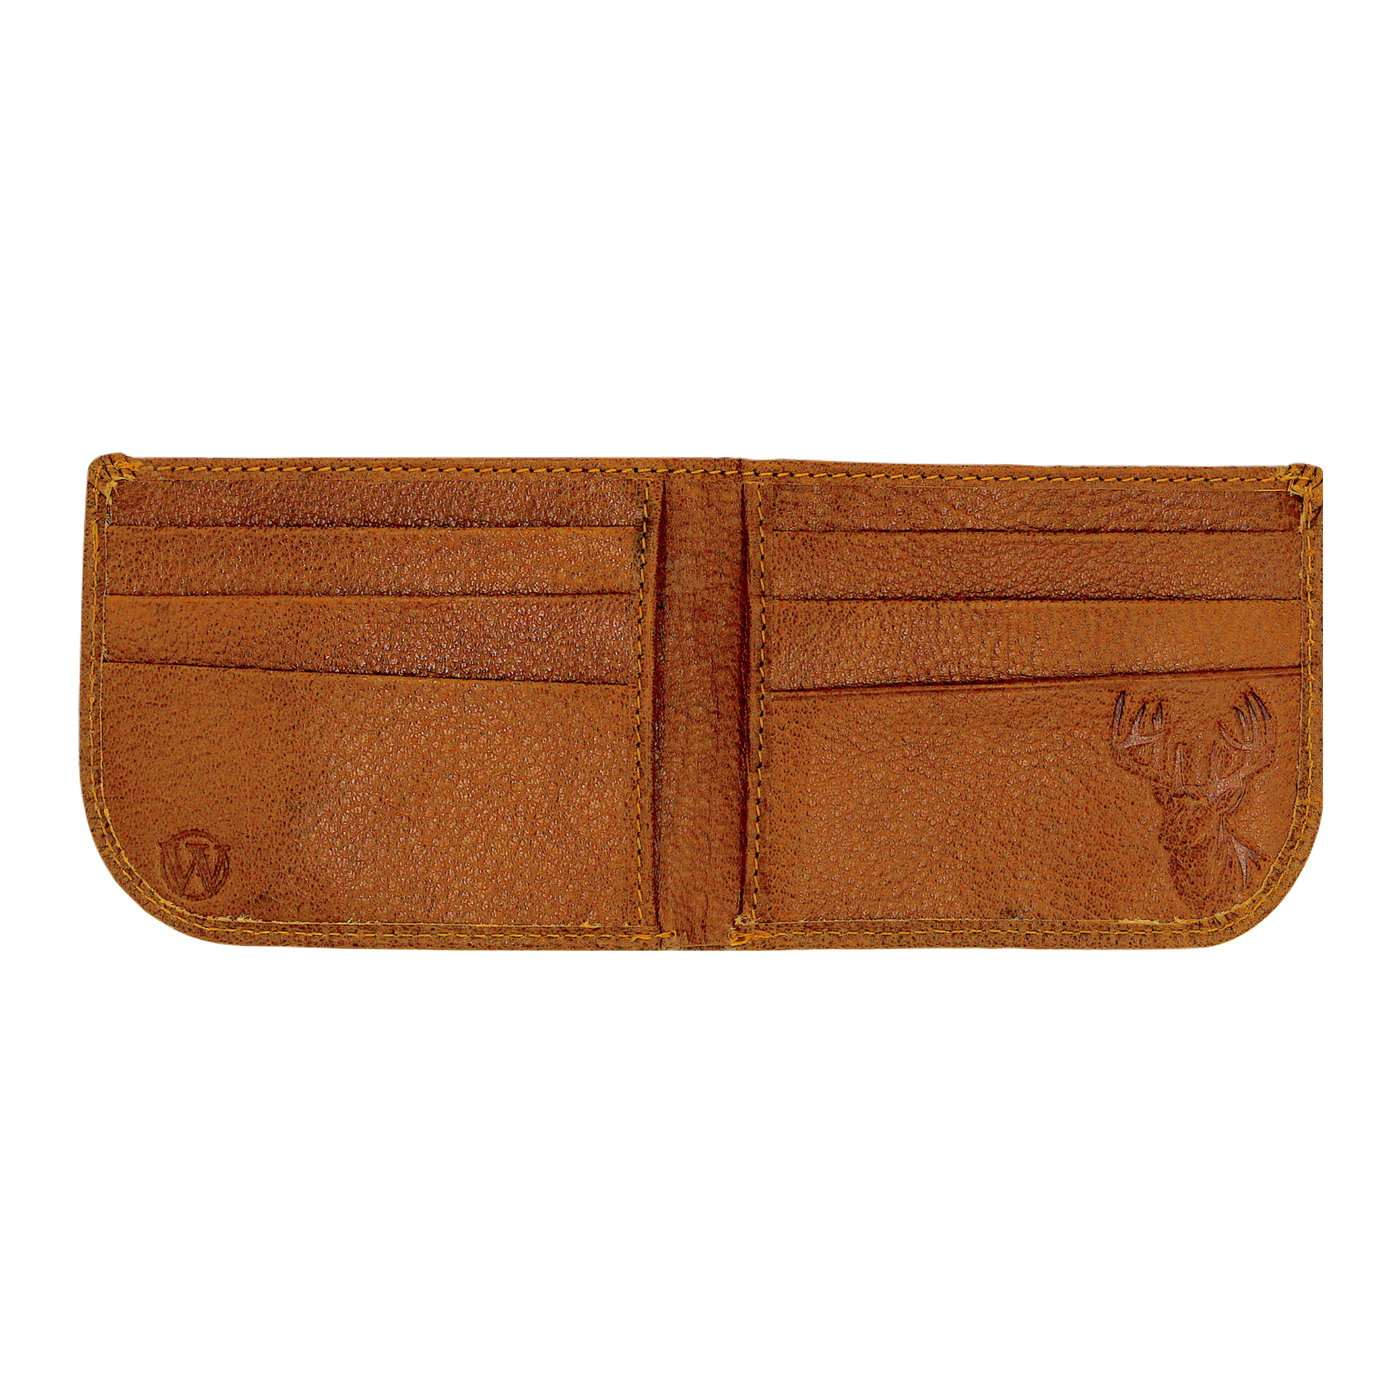 Our new Pursuit Bifold Radius Buck Wallet is a top seller with its premier full grain leather and bold hand-dyed color, making it perfect for any avid hunter! Get yours today! 6 Hi-Viz Interior Card Slots 2 Storage Pockets Bill Compartment Modern Style & Design Stylish Debossed Buck Radius comfort corner Dimensions: 4.5"L x 3.5"H RFID Protection Color: Golden